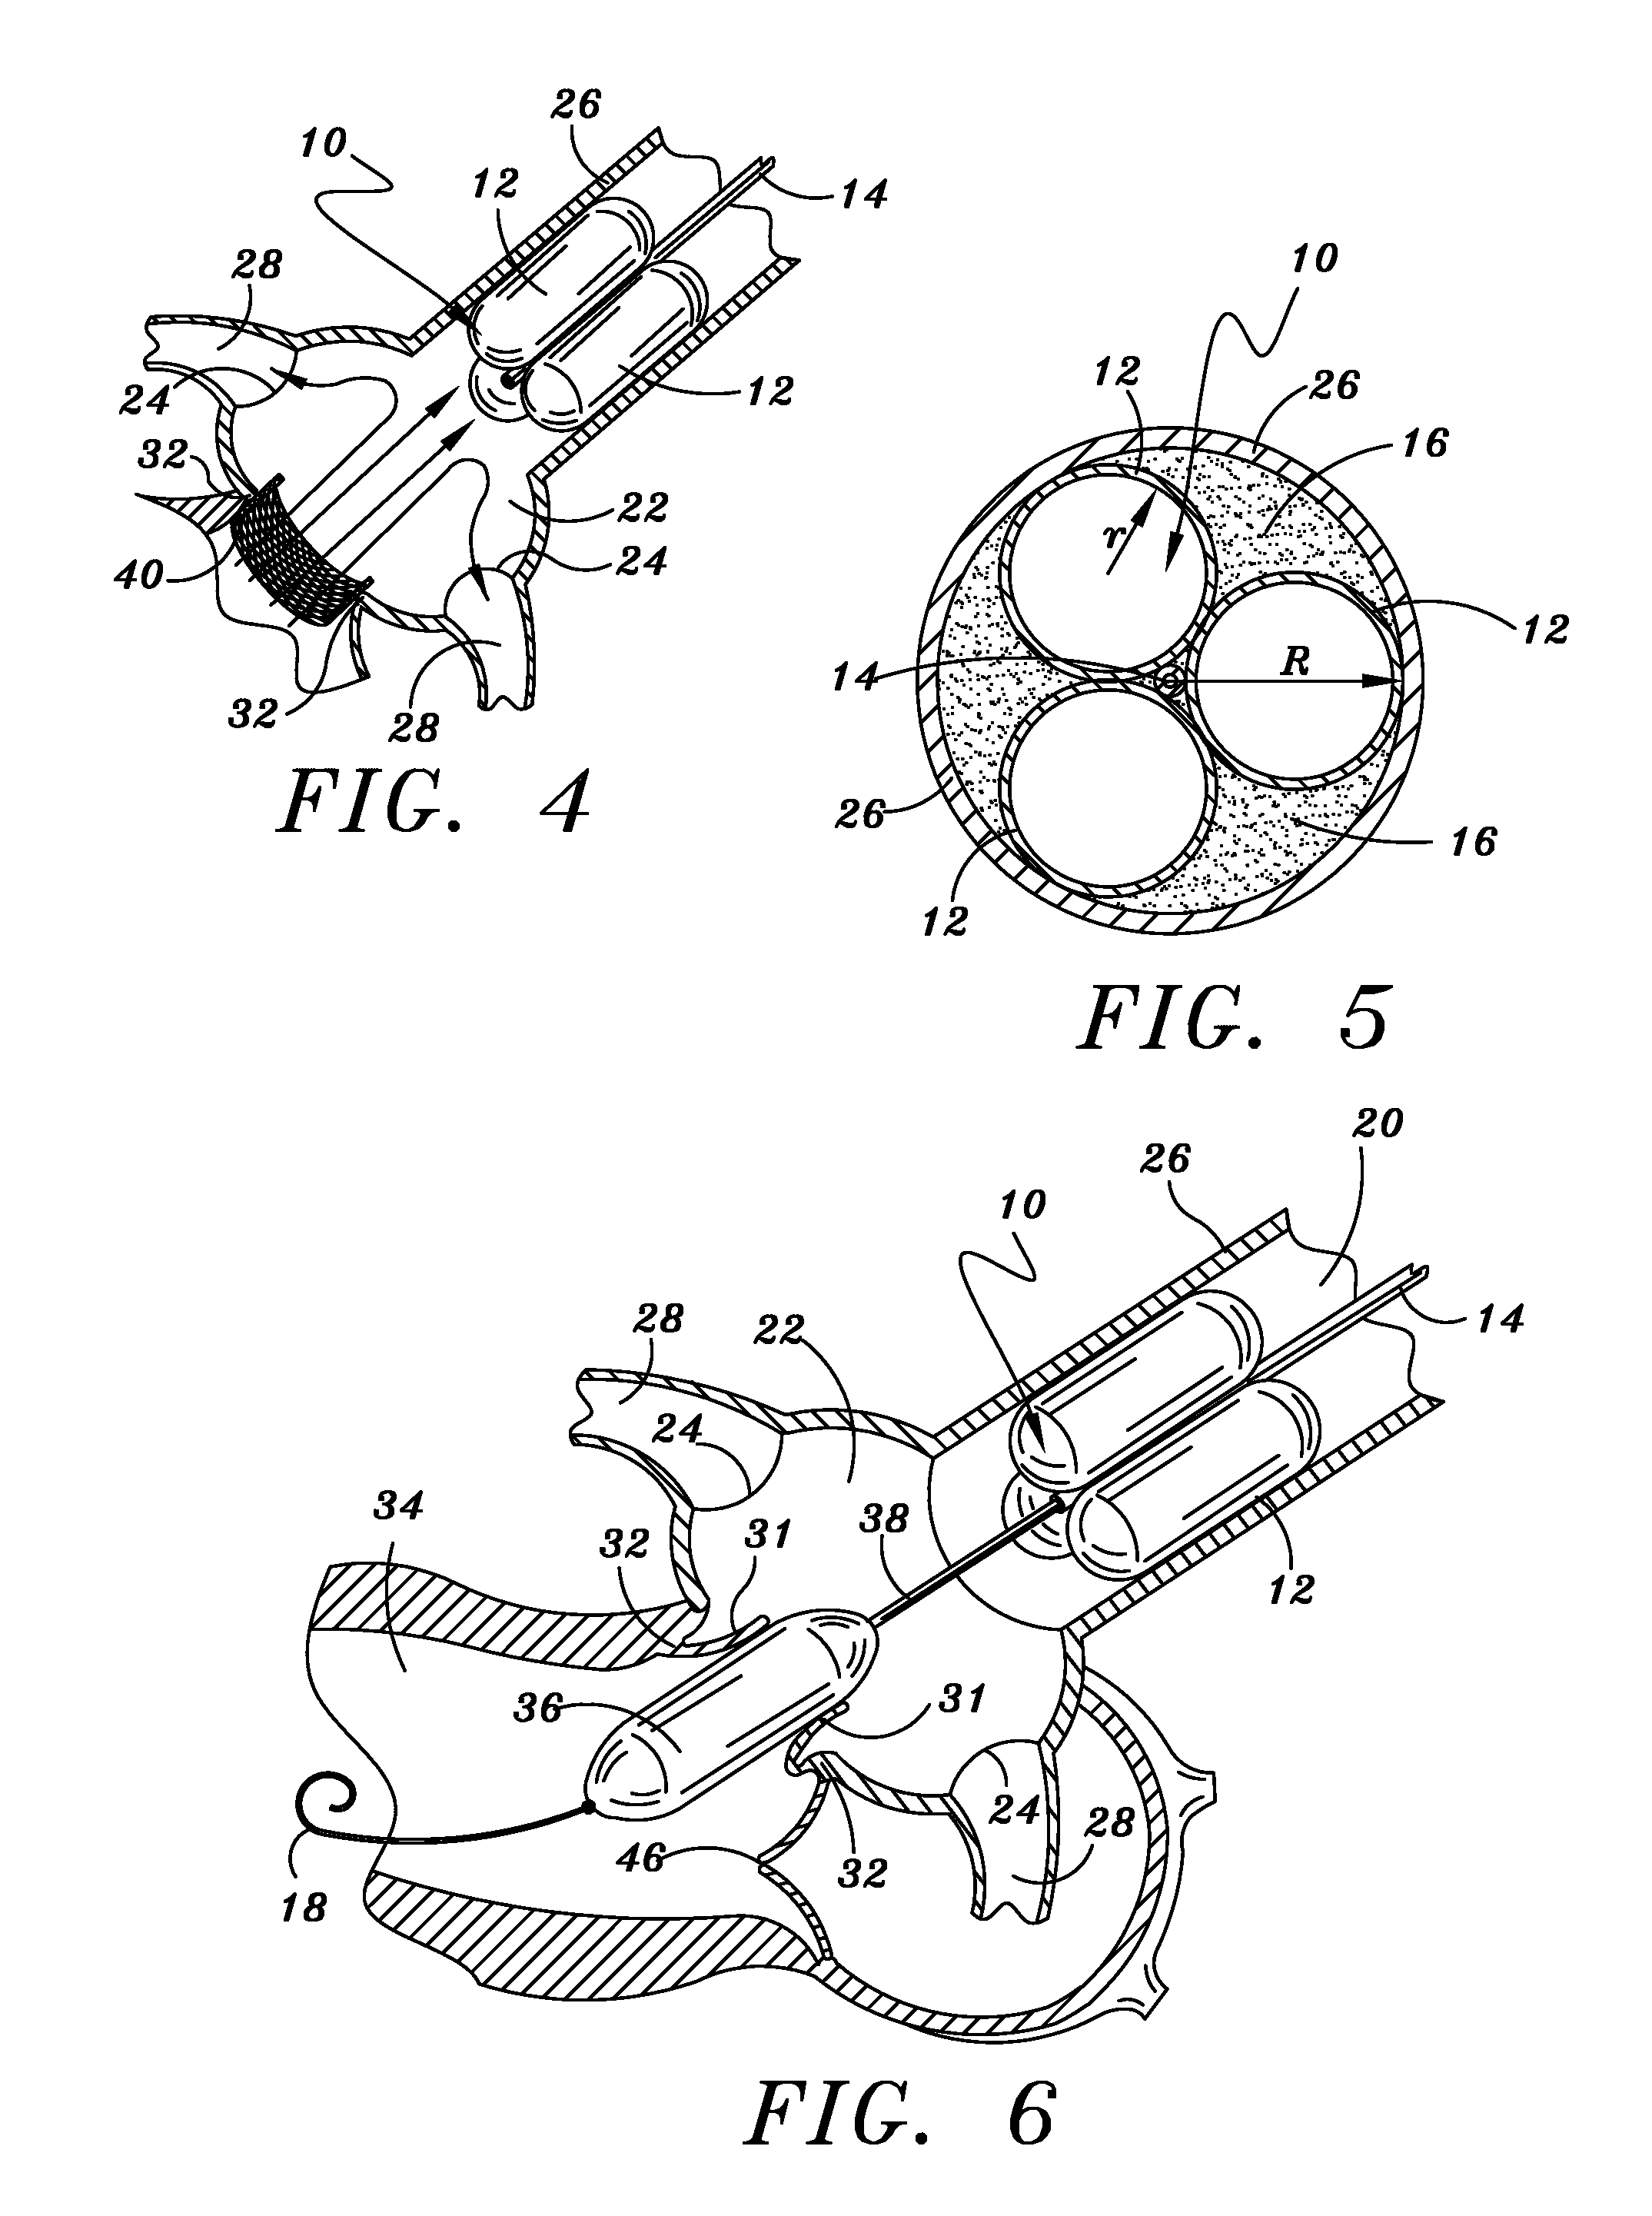 Methods and apparatus for percutaneous aortic valve replacement